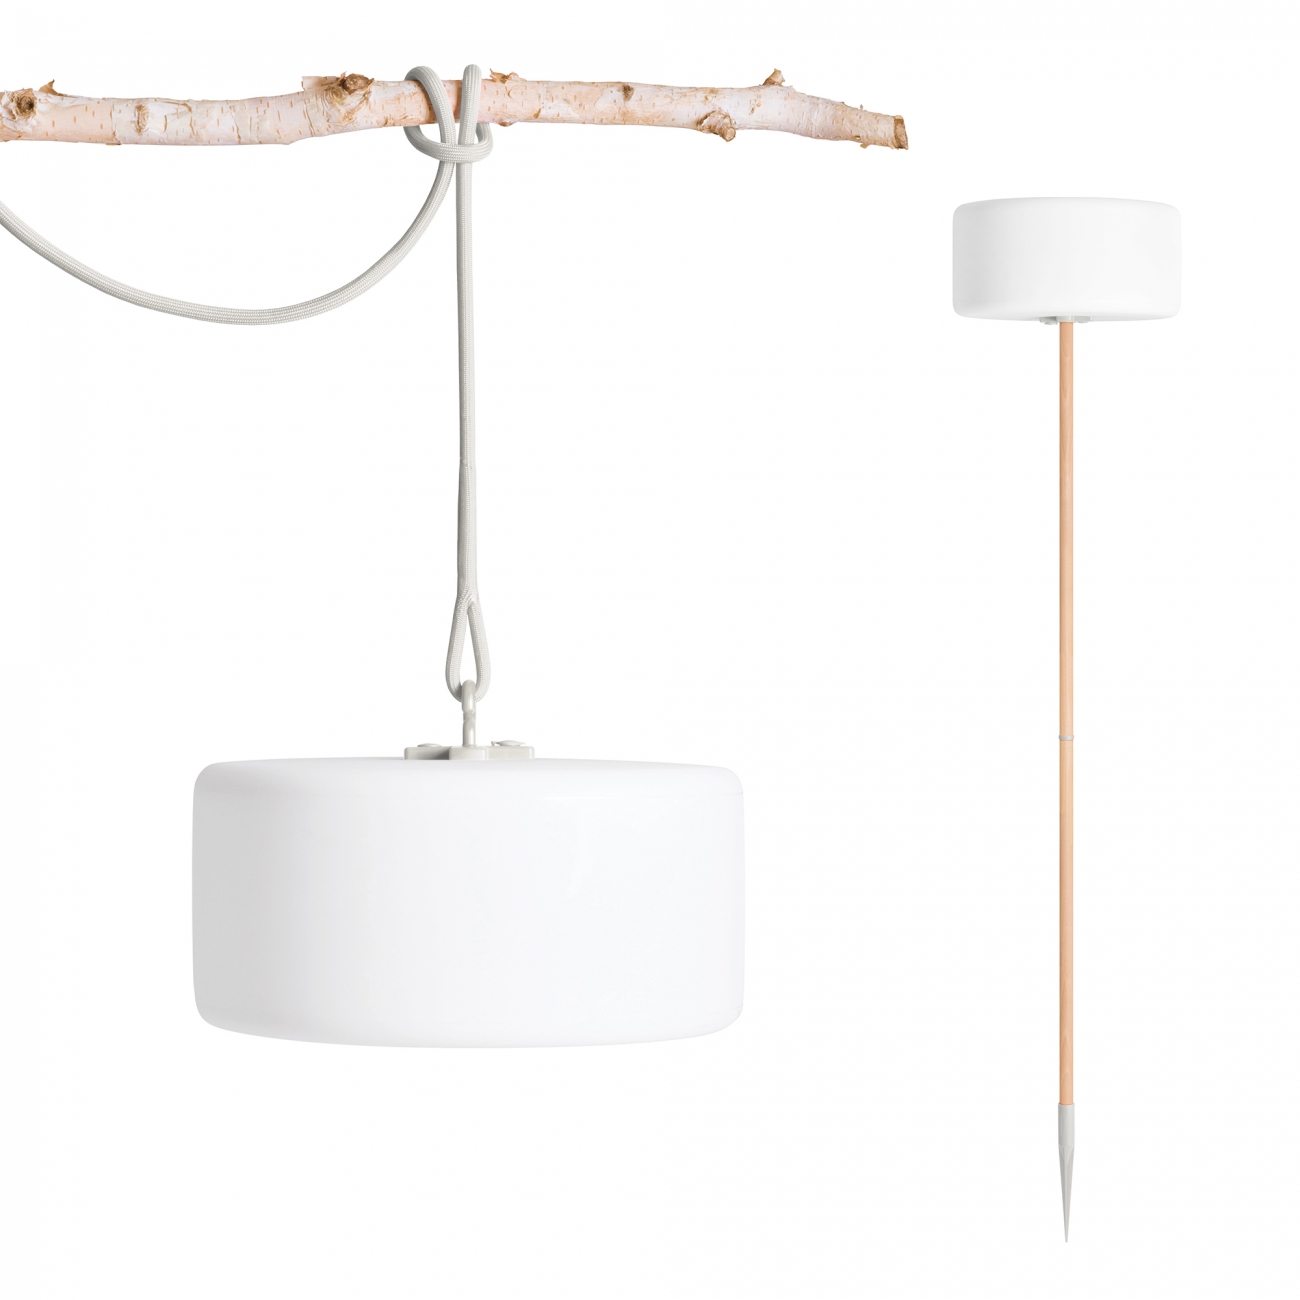 Fatboy Thierry le Swinger Outdoor lamp